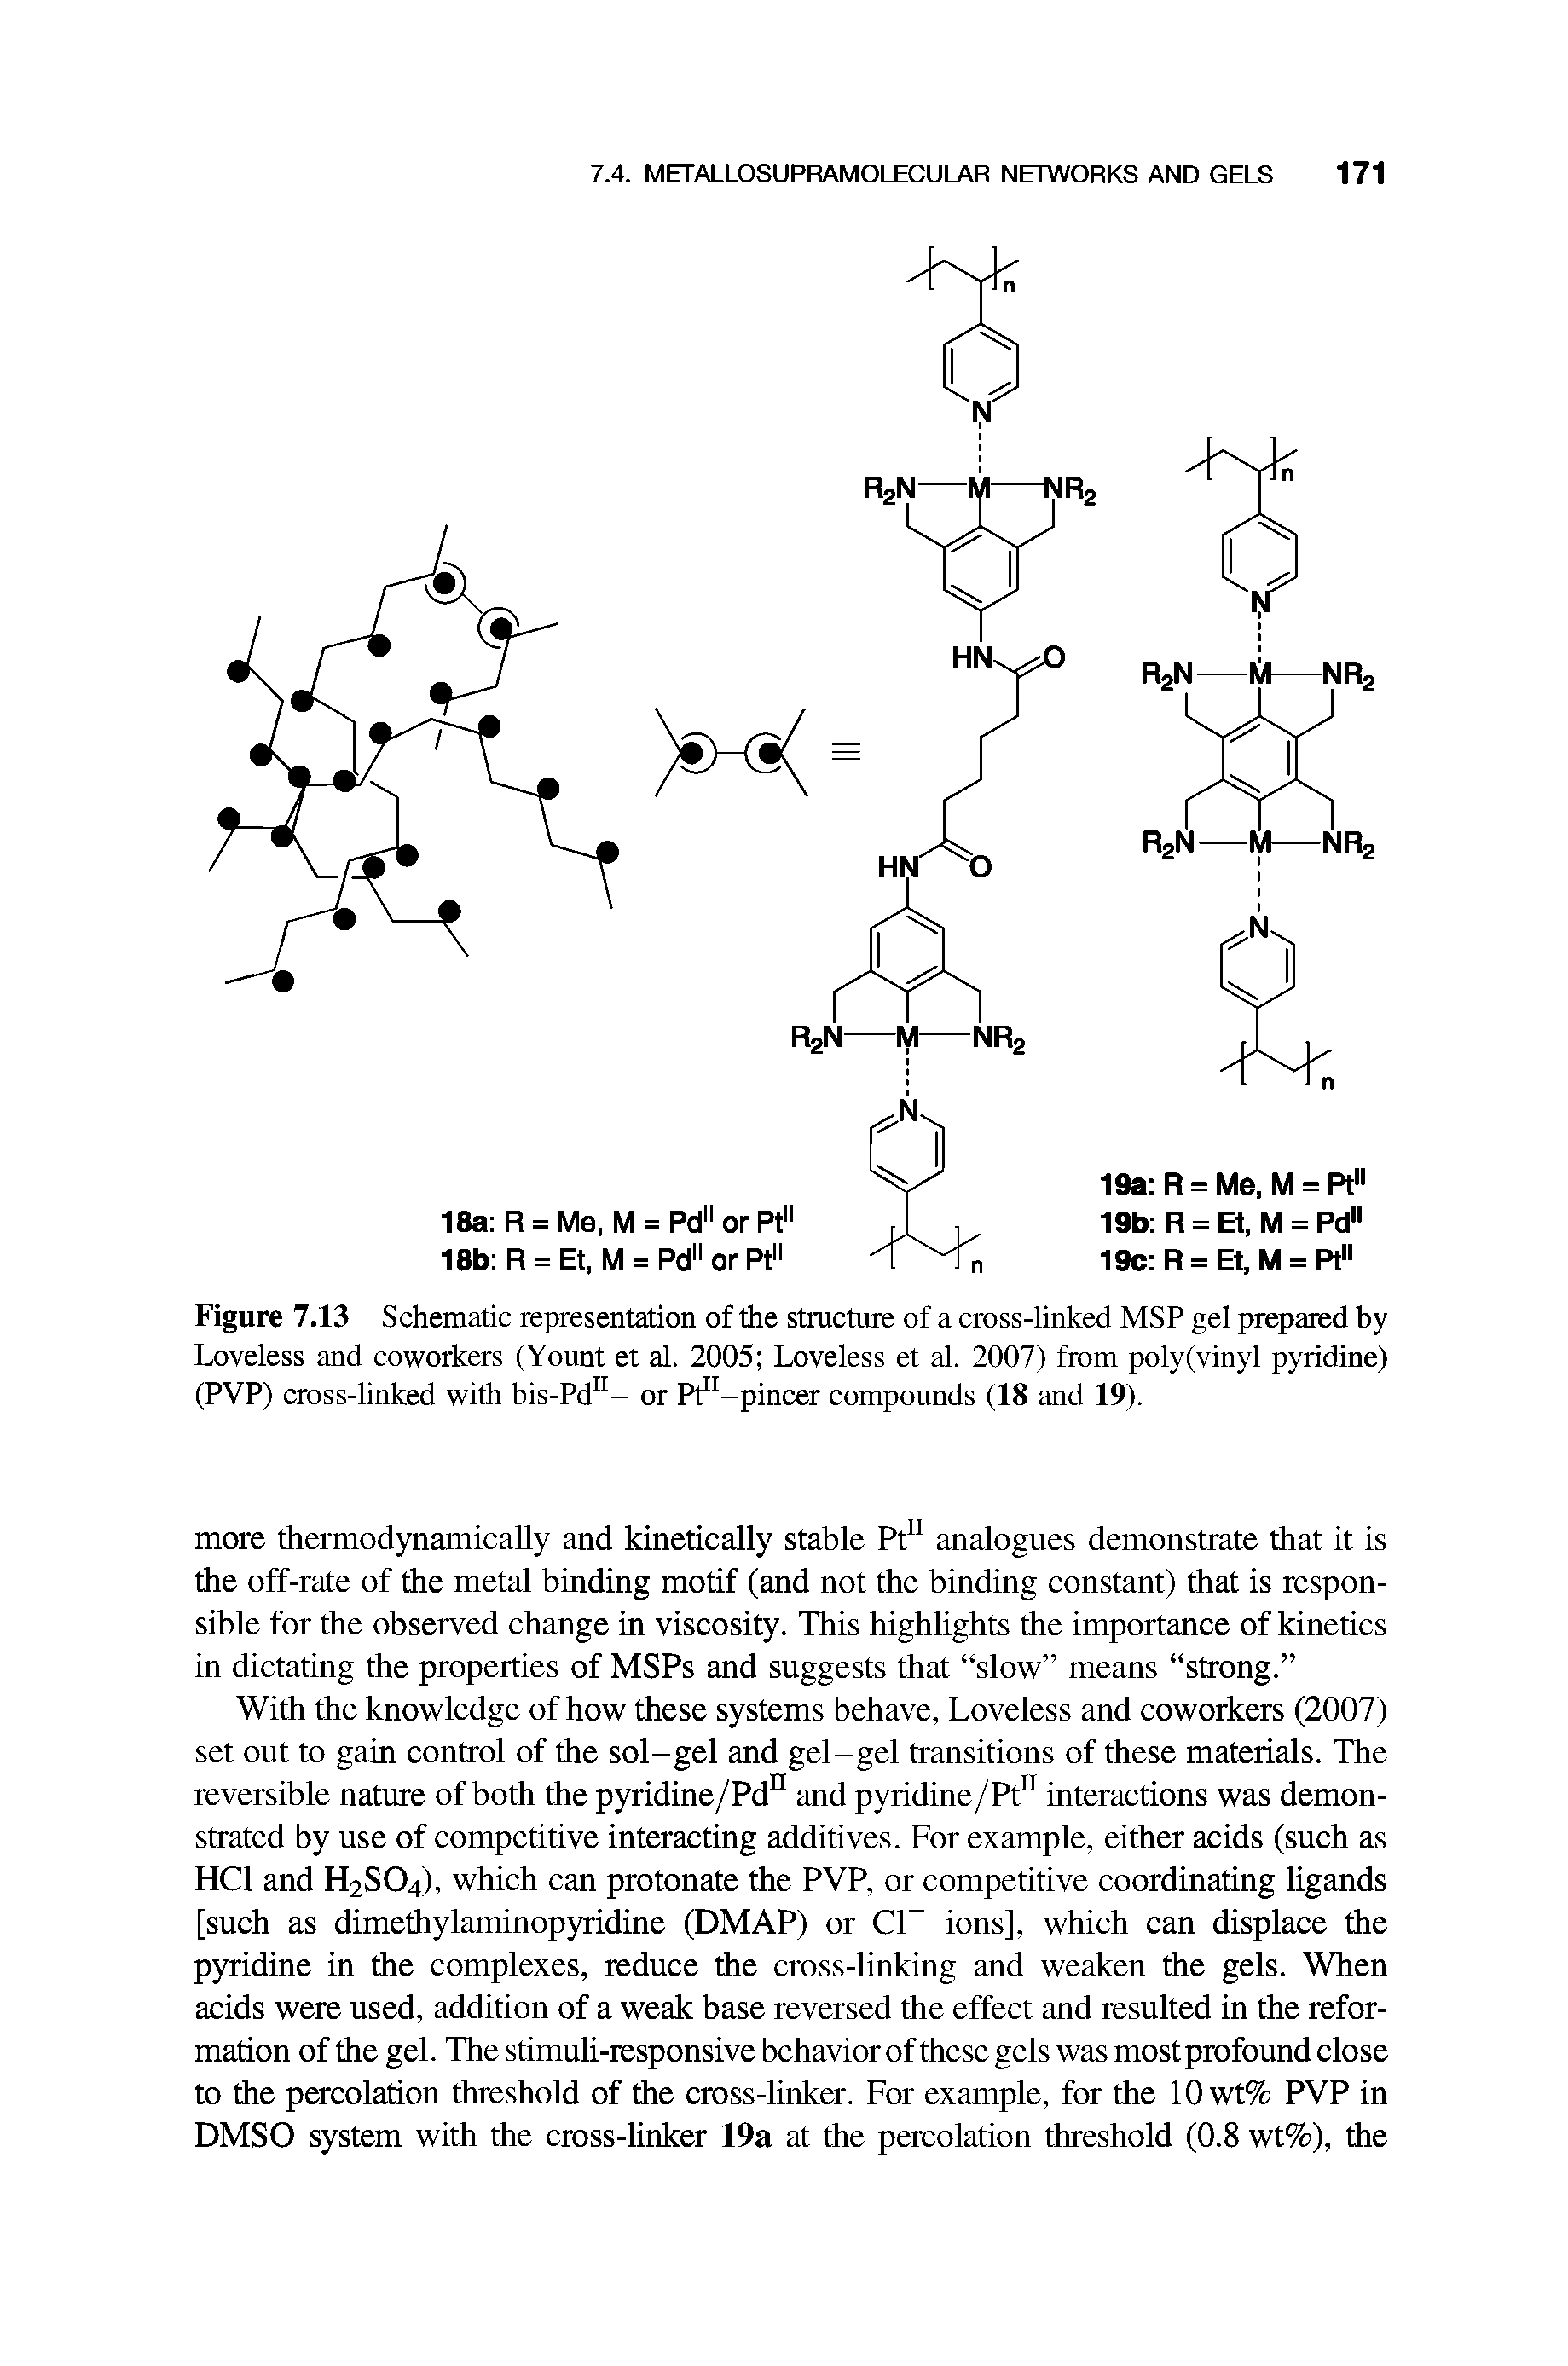 Figure 7.13 Schematic representation of the structure of a cross-linked MSP gel prepared by Loveless and coworkers (Yount et al. 2005 Loveless et al. 2007) from poly(vinyl pyridine) (PVP) cross-linked with bis-Pd - or Pt -pincer compounds (18 and 19).